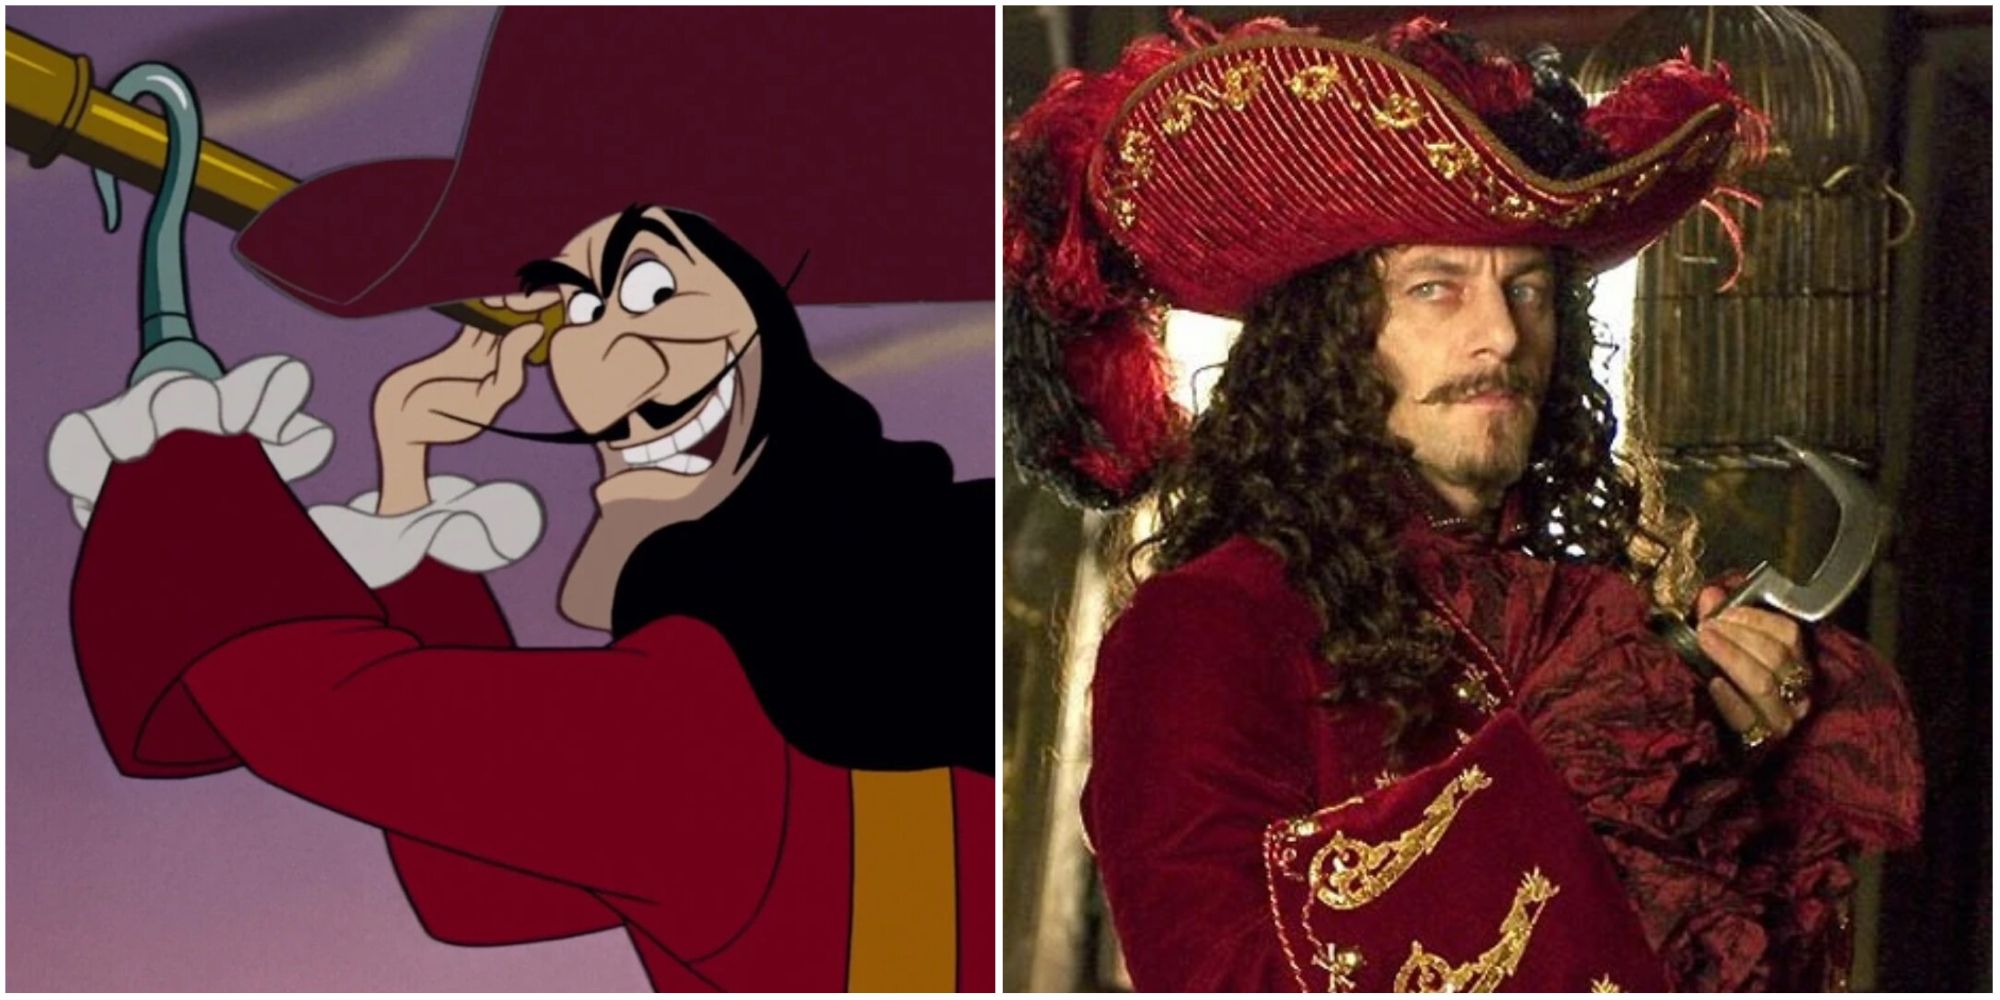 Captain Hook in Disney's Peter Pan and the 2003 film